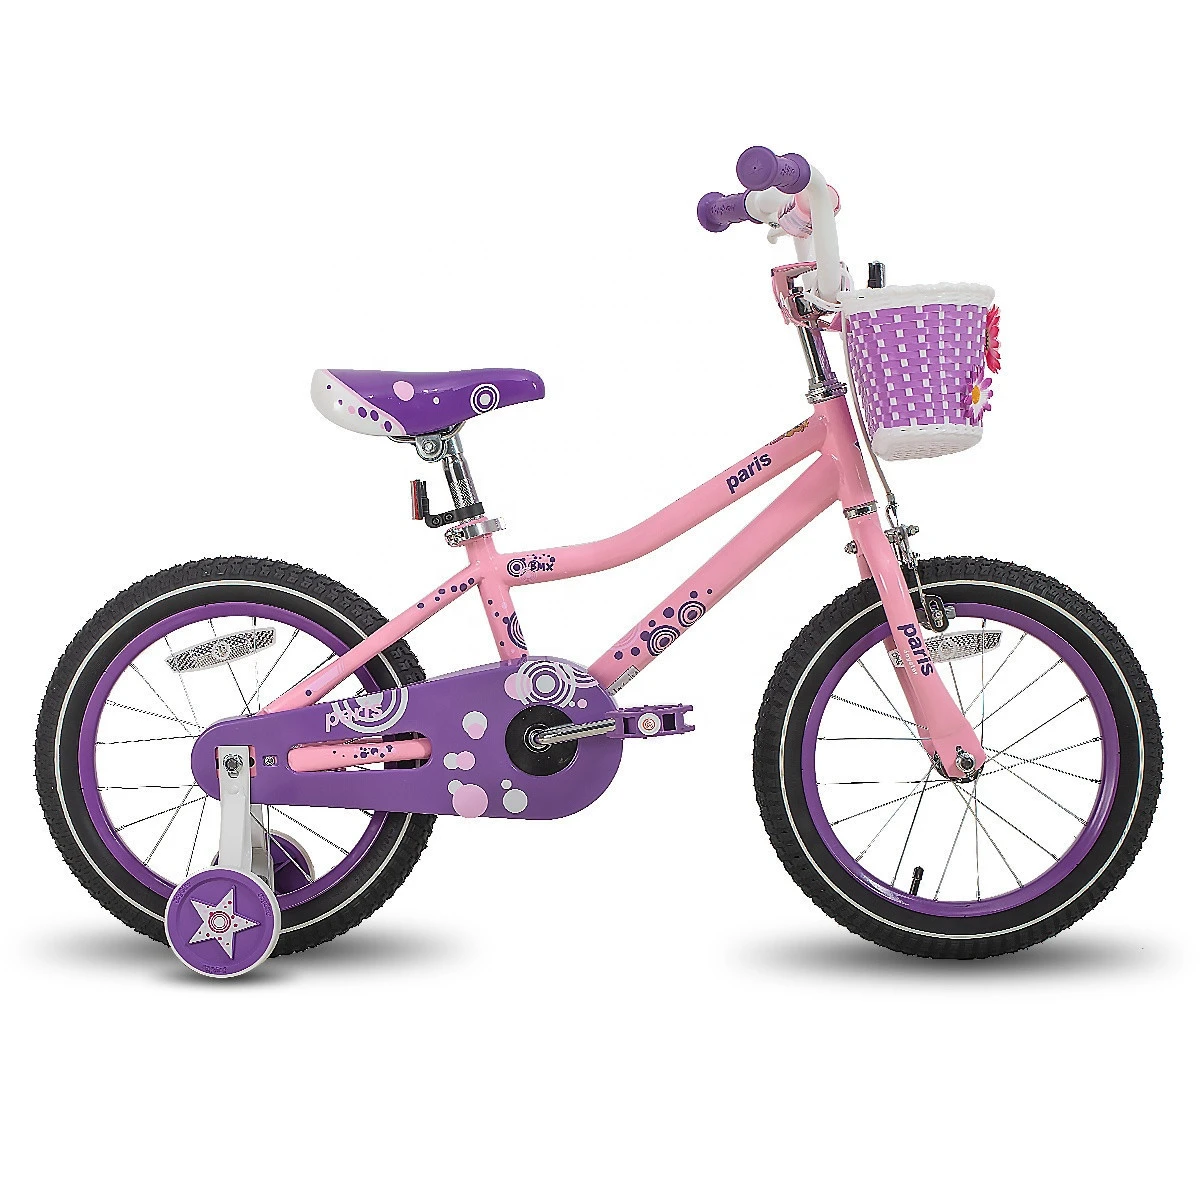 JOYKIE CPSC Tested Best Quality 2020 Girls Bike 12 14 16 18 Inch Kids Bike Bicycle for 3 to 9 years old children